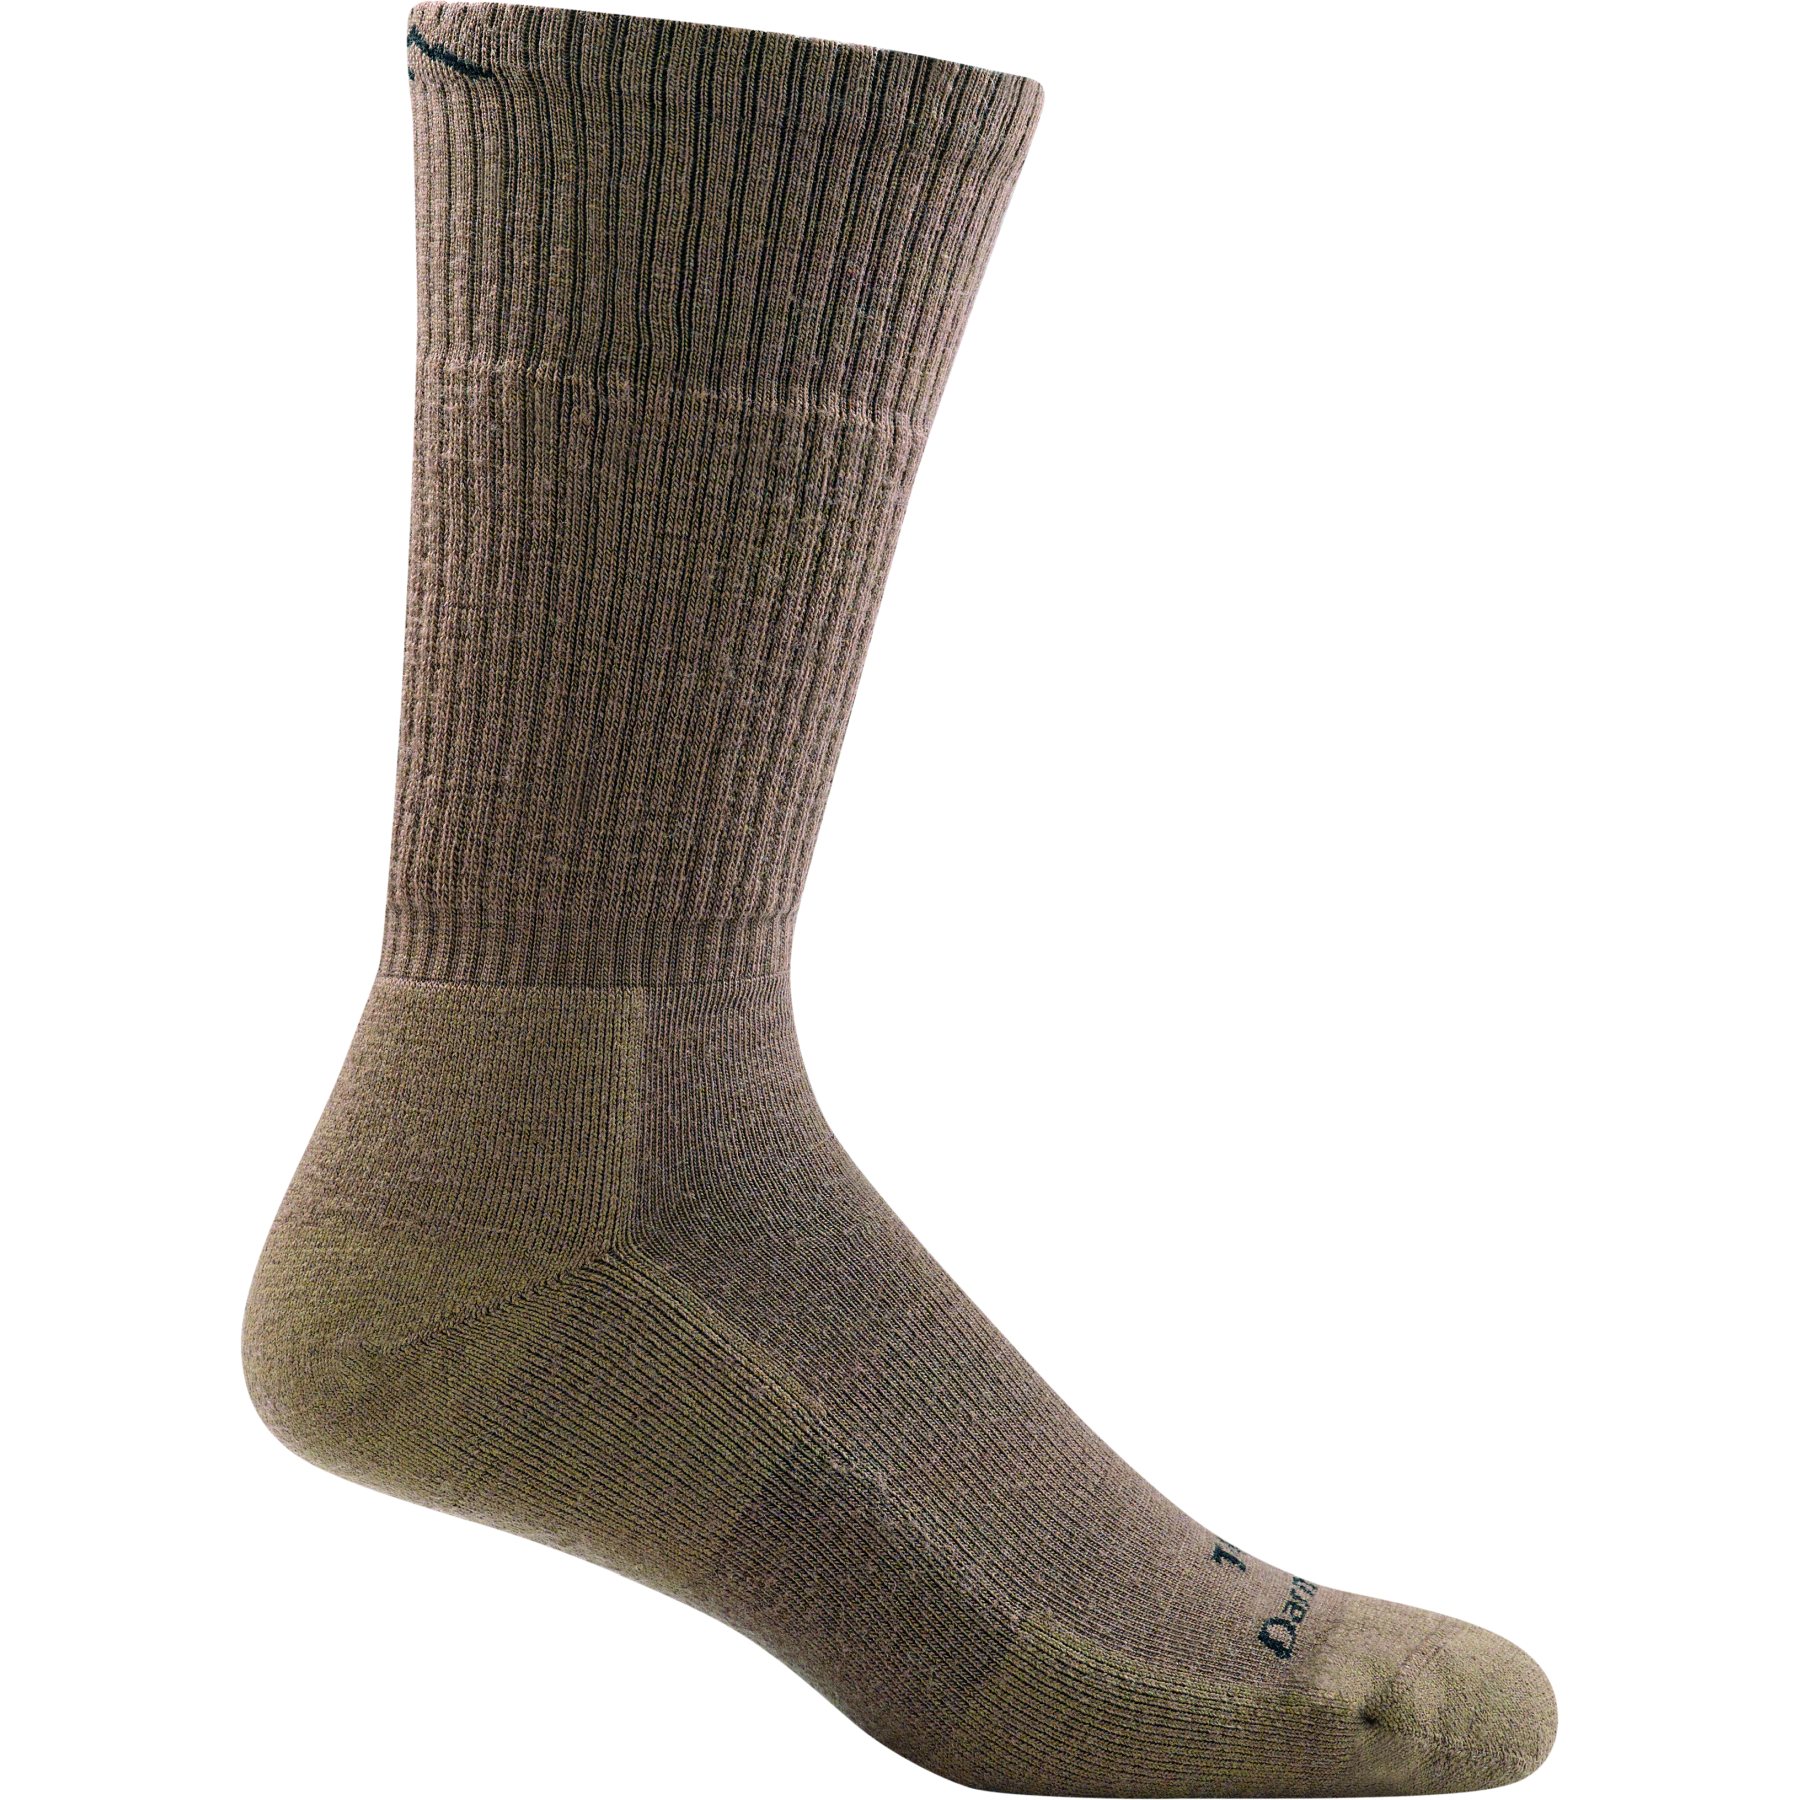 Picture of Darn Tough T4021 Tactical Boot Midweight Socks With Cushion - Coyote Brown